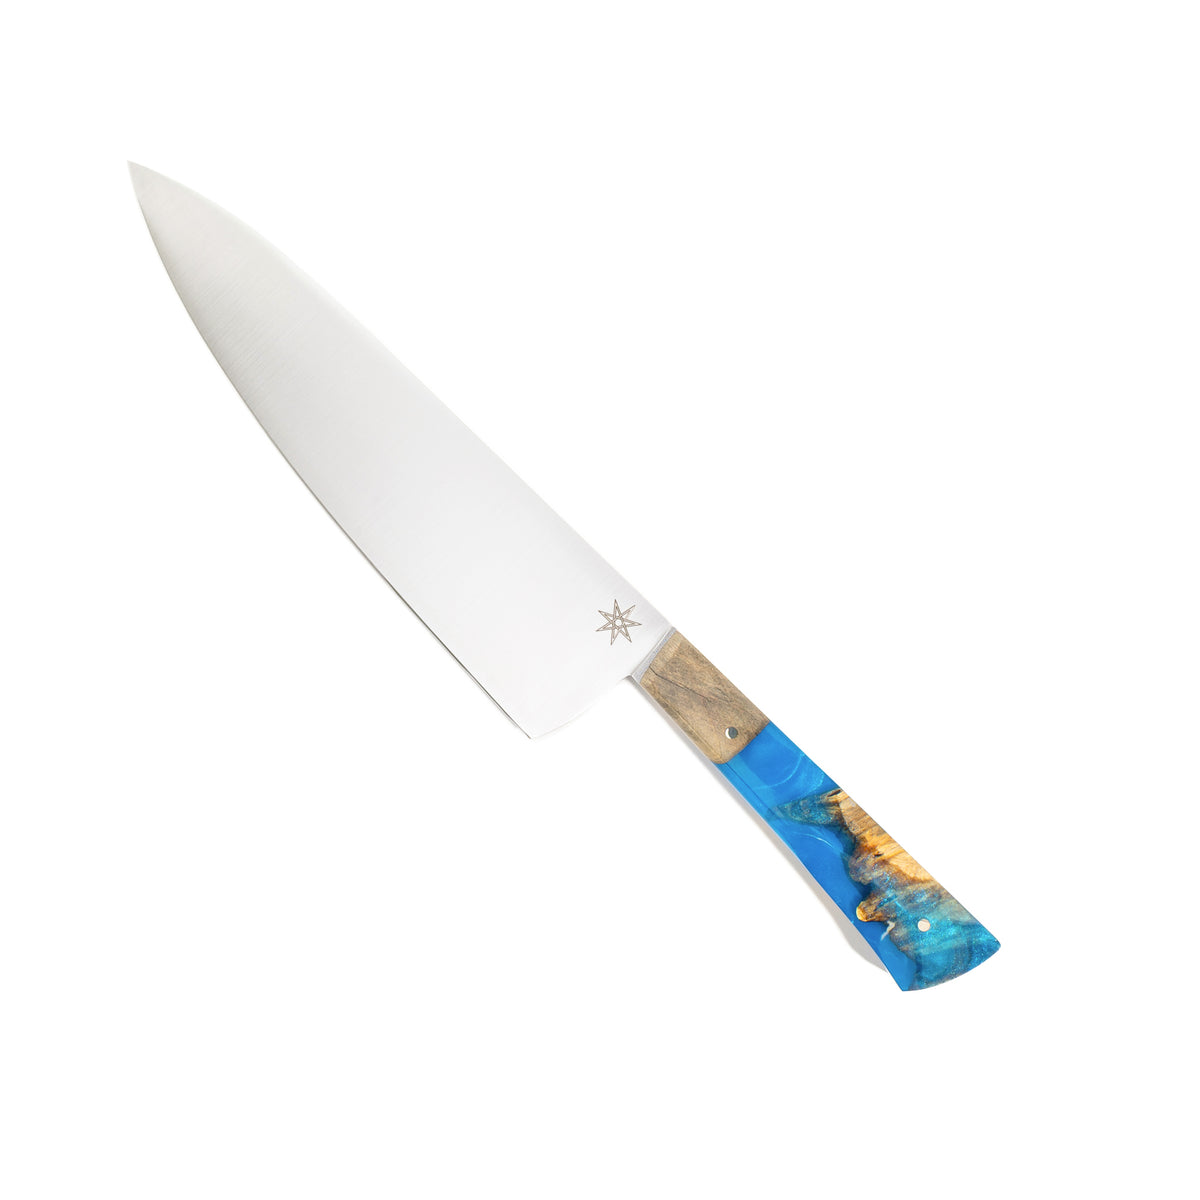 Town Cutler Tahoe Bliss 8.5" Chef Knife. Nitro-V stainless steel blade with blue and buckeye burl handle.